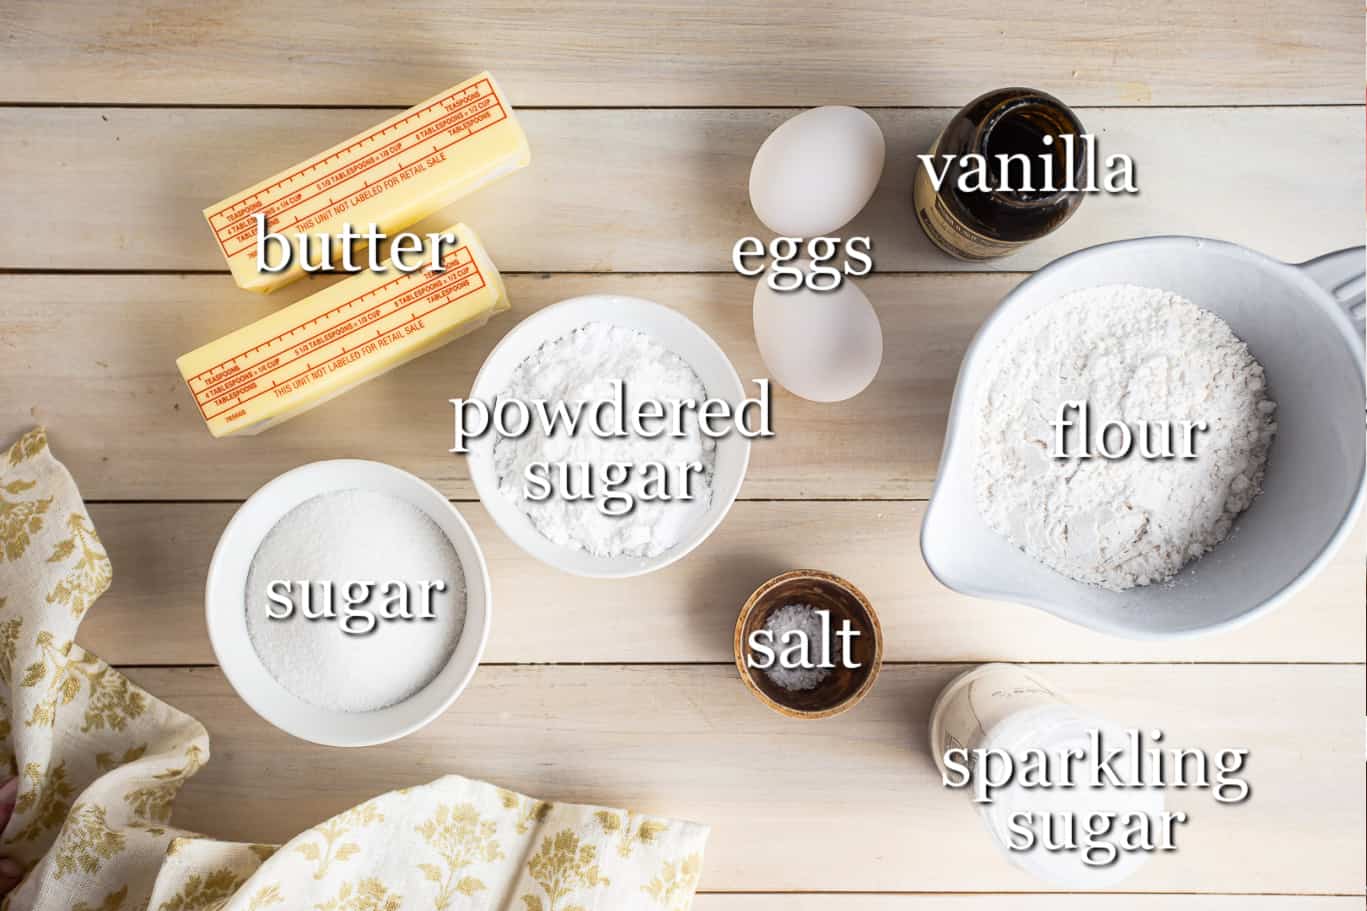 Ingredients for making butter cookies, with text labels.